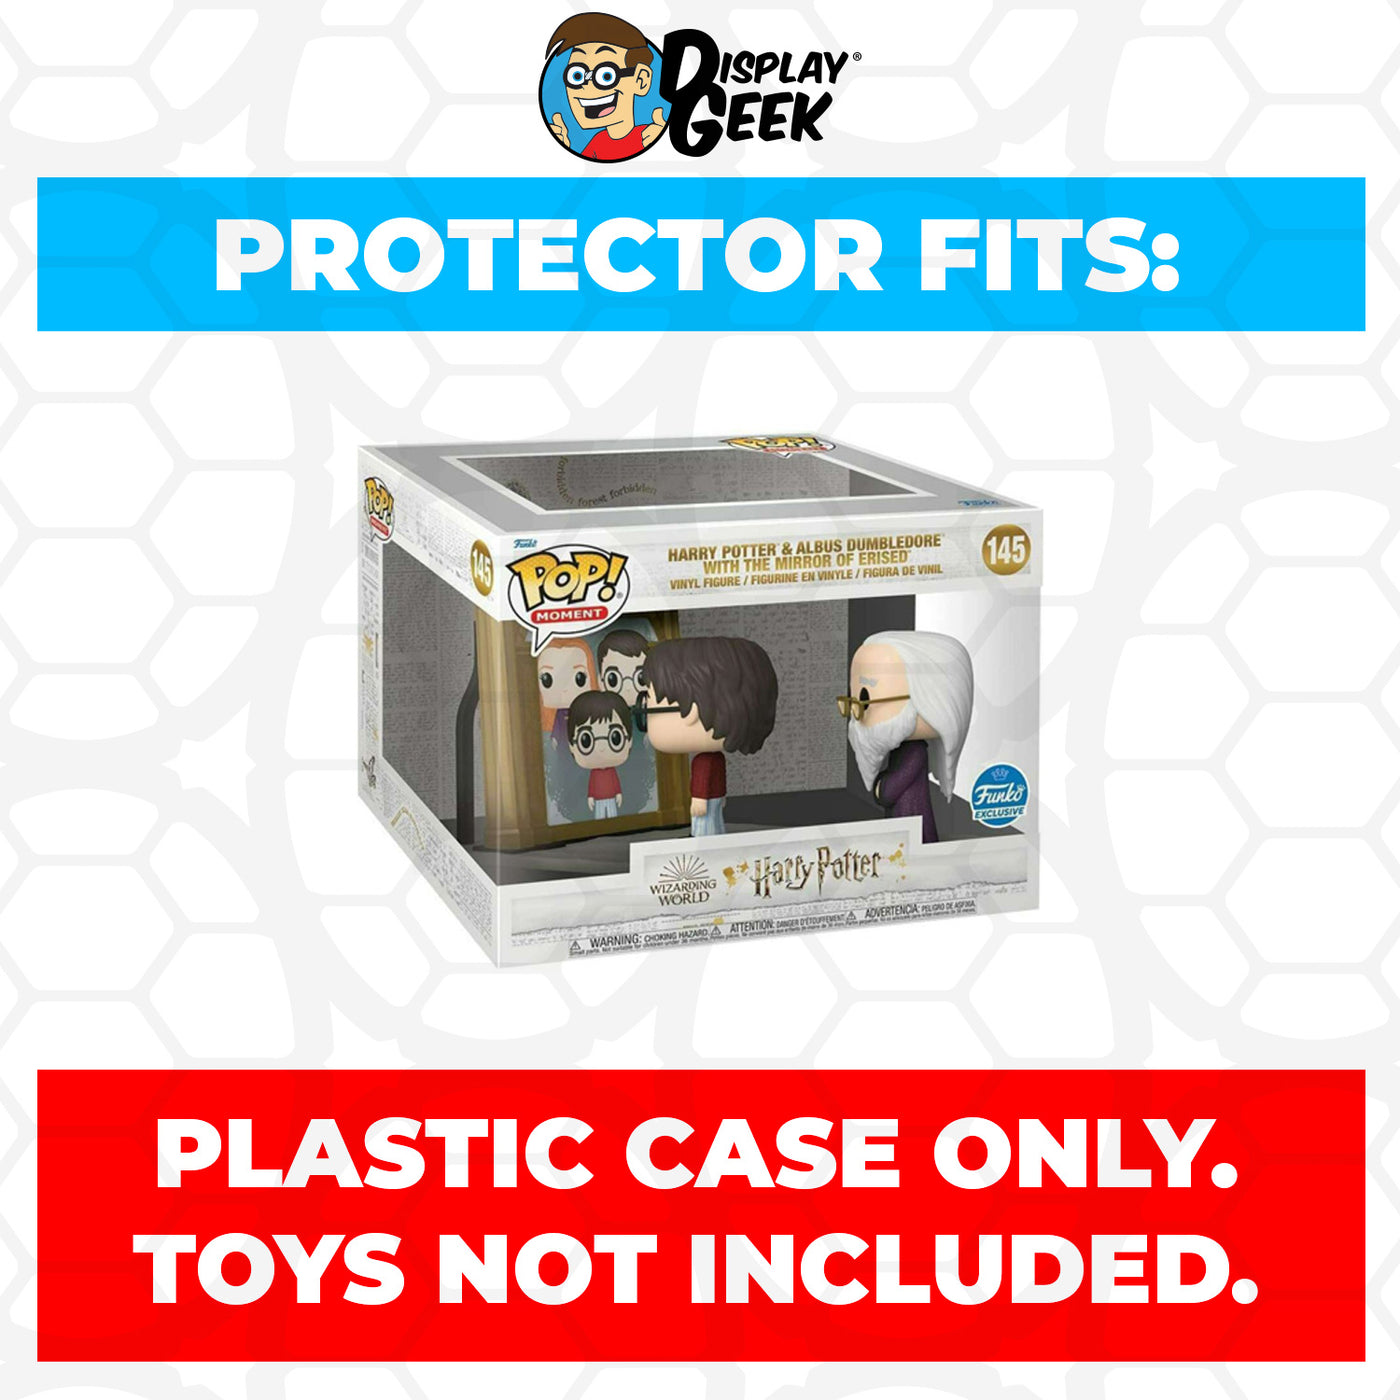 Pop Protector for Harry Potter Dumbledore Mirror Erised #145 Funko Pop Moment on The Protector Guide App by Display Geek